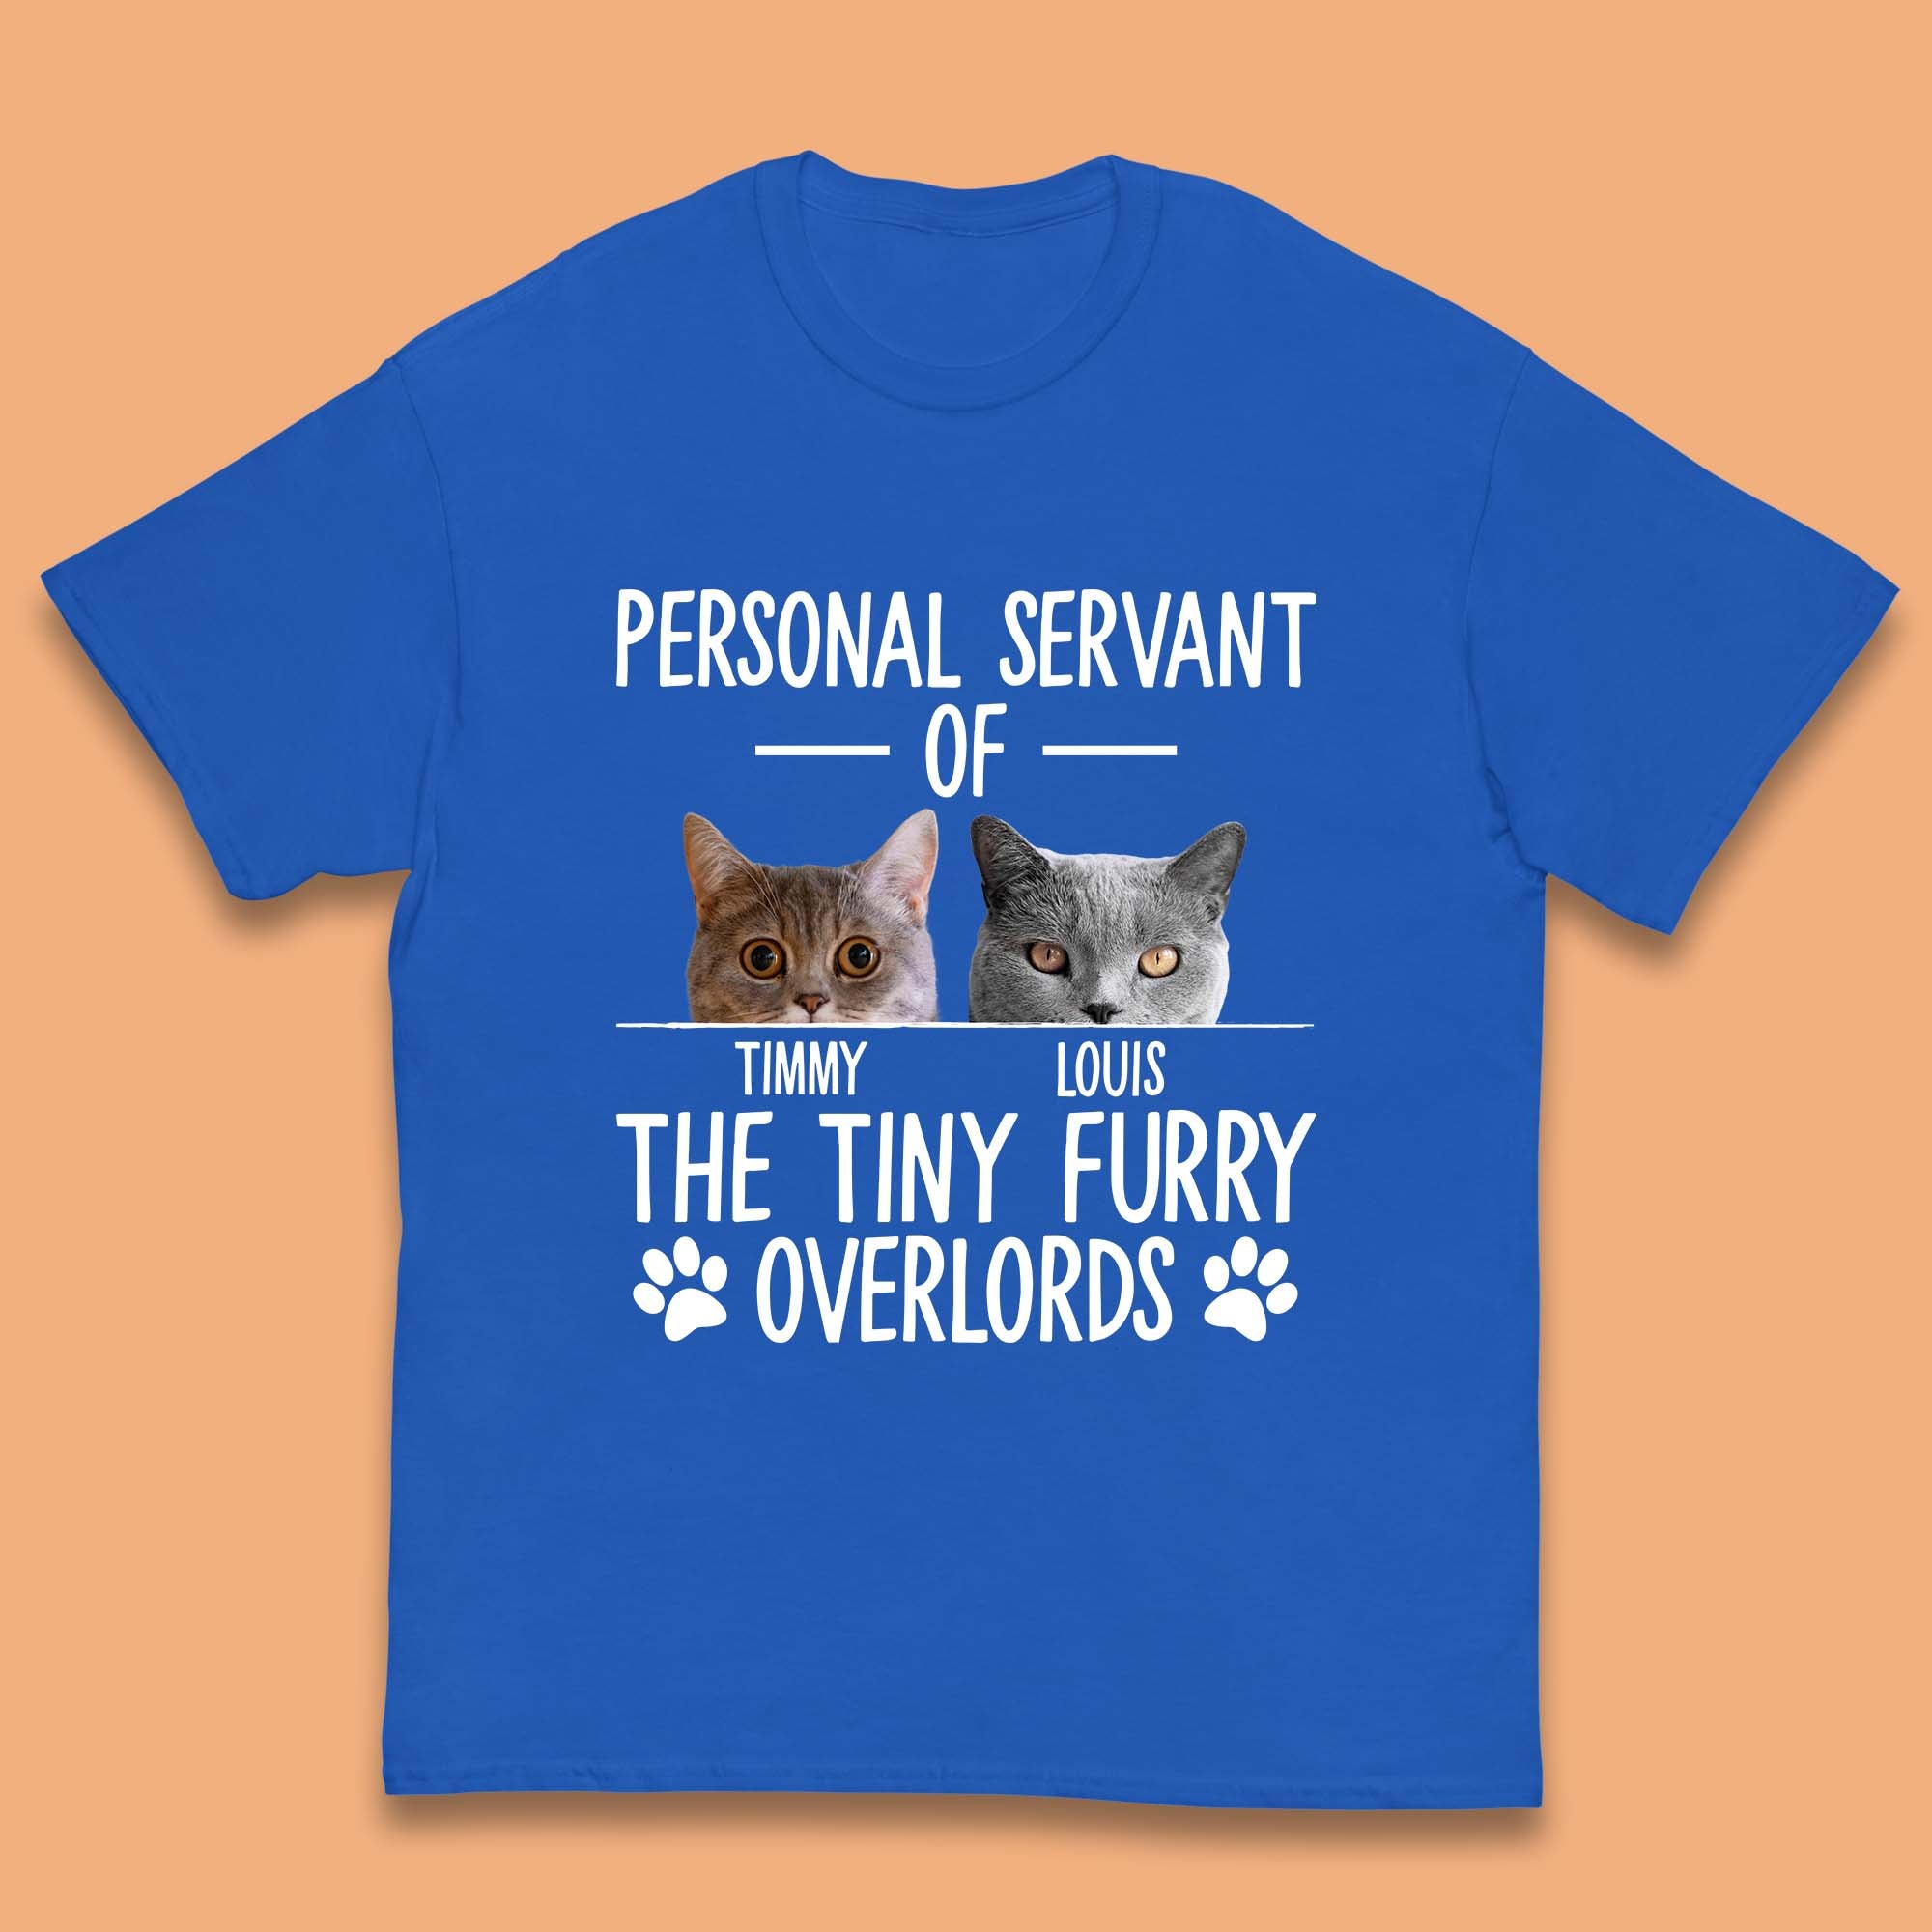 Personalised Servant Of The Tiny Furry Overlords Kids T-Shirt